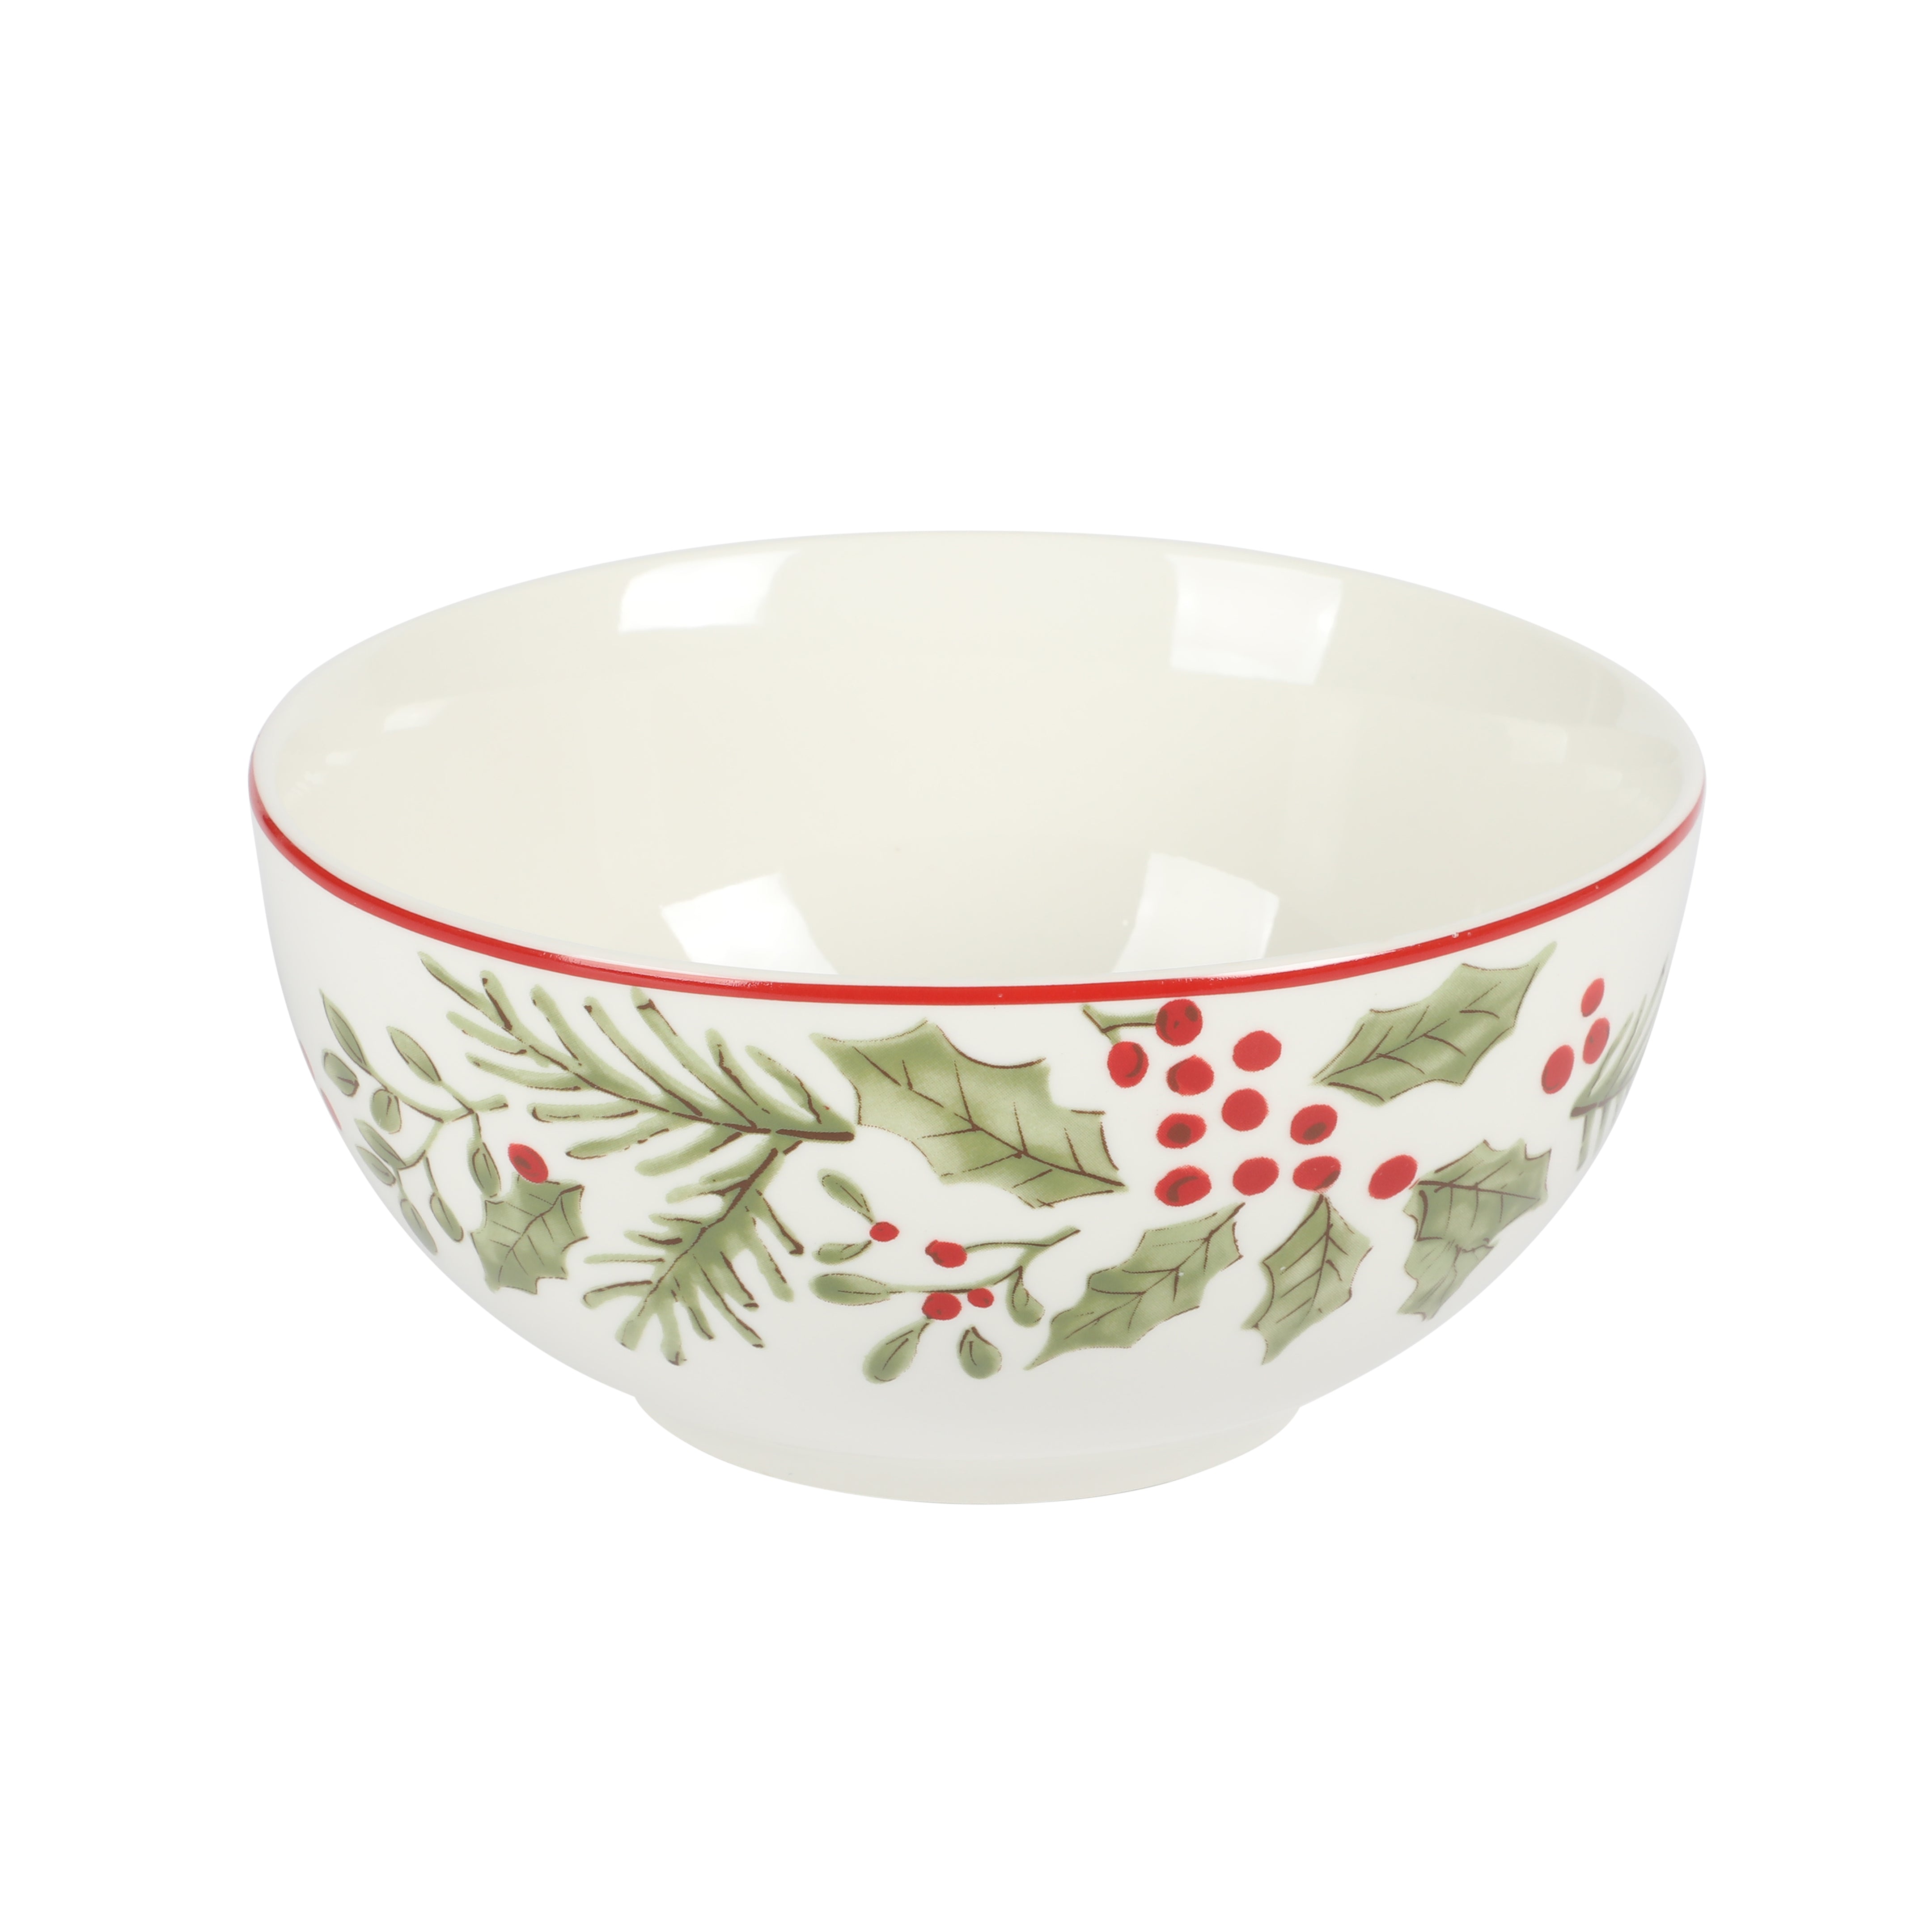 Gibson Home 12 Piece Festive Berries Decorated Porcelain Dinnerware Set